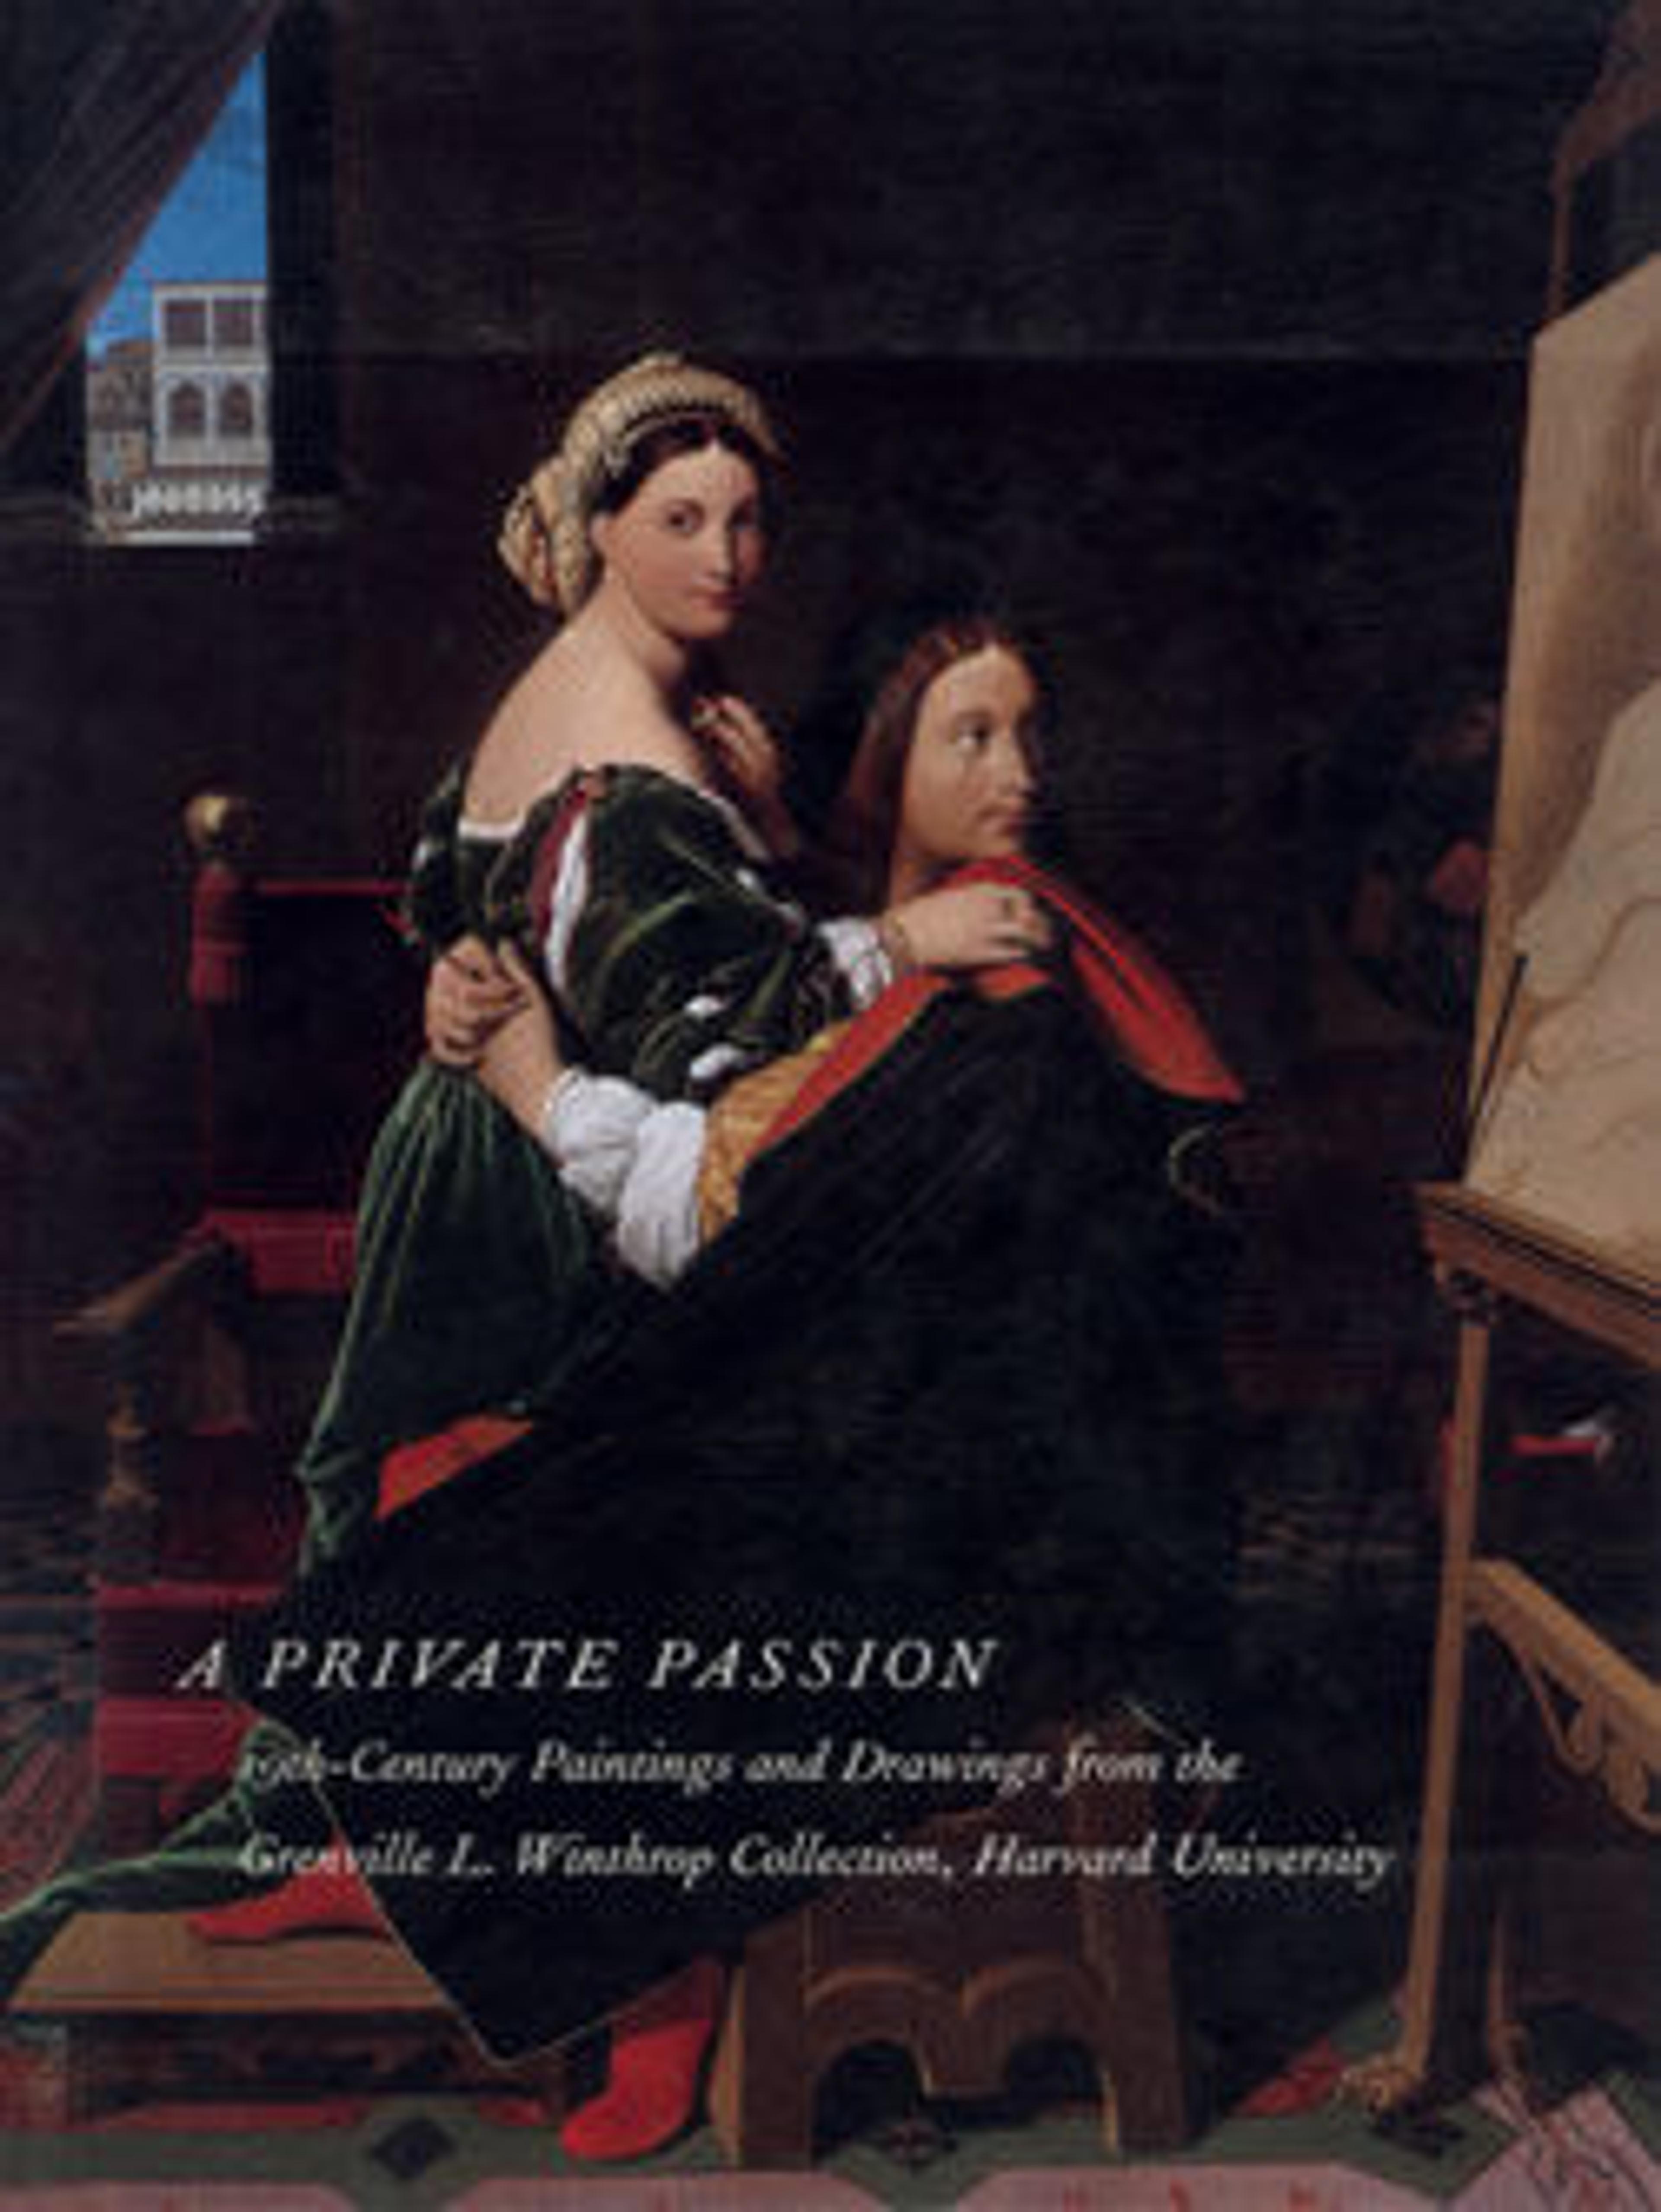 A Private Passion: Nineteenth-Century Paintings and Drawings from the Grenville L. Winthrop Collection, Harvard University